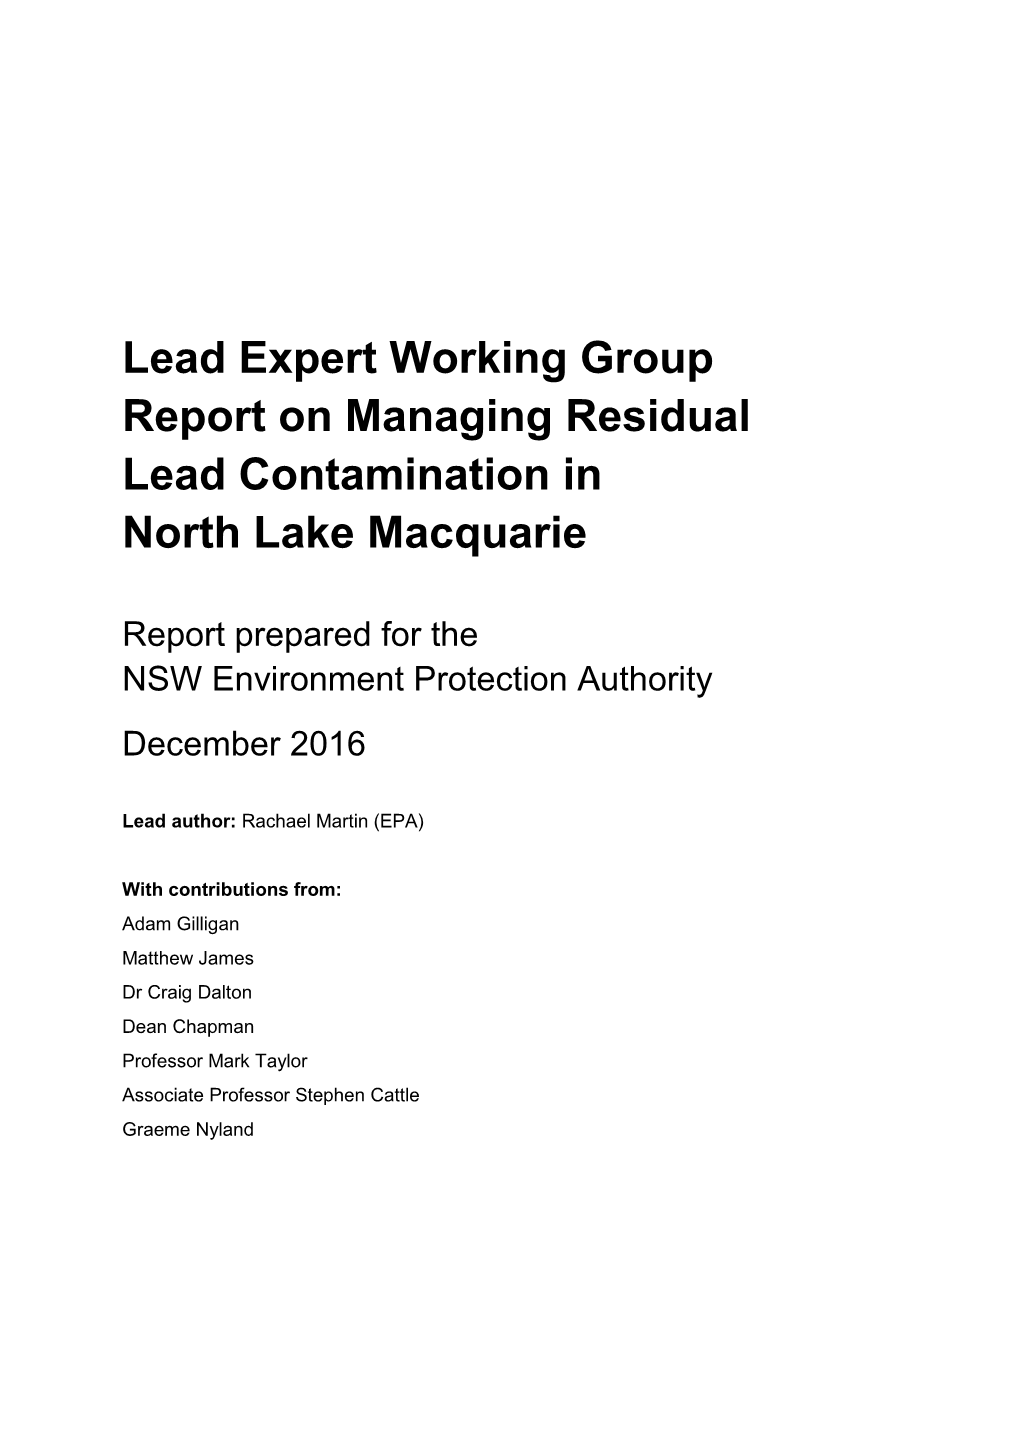 Report on Managing Residual Lead Contamination in North Lake Macquarie